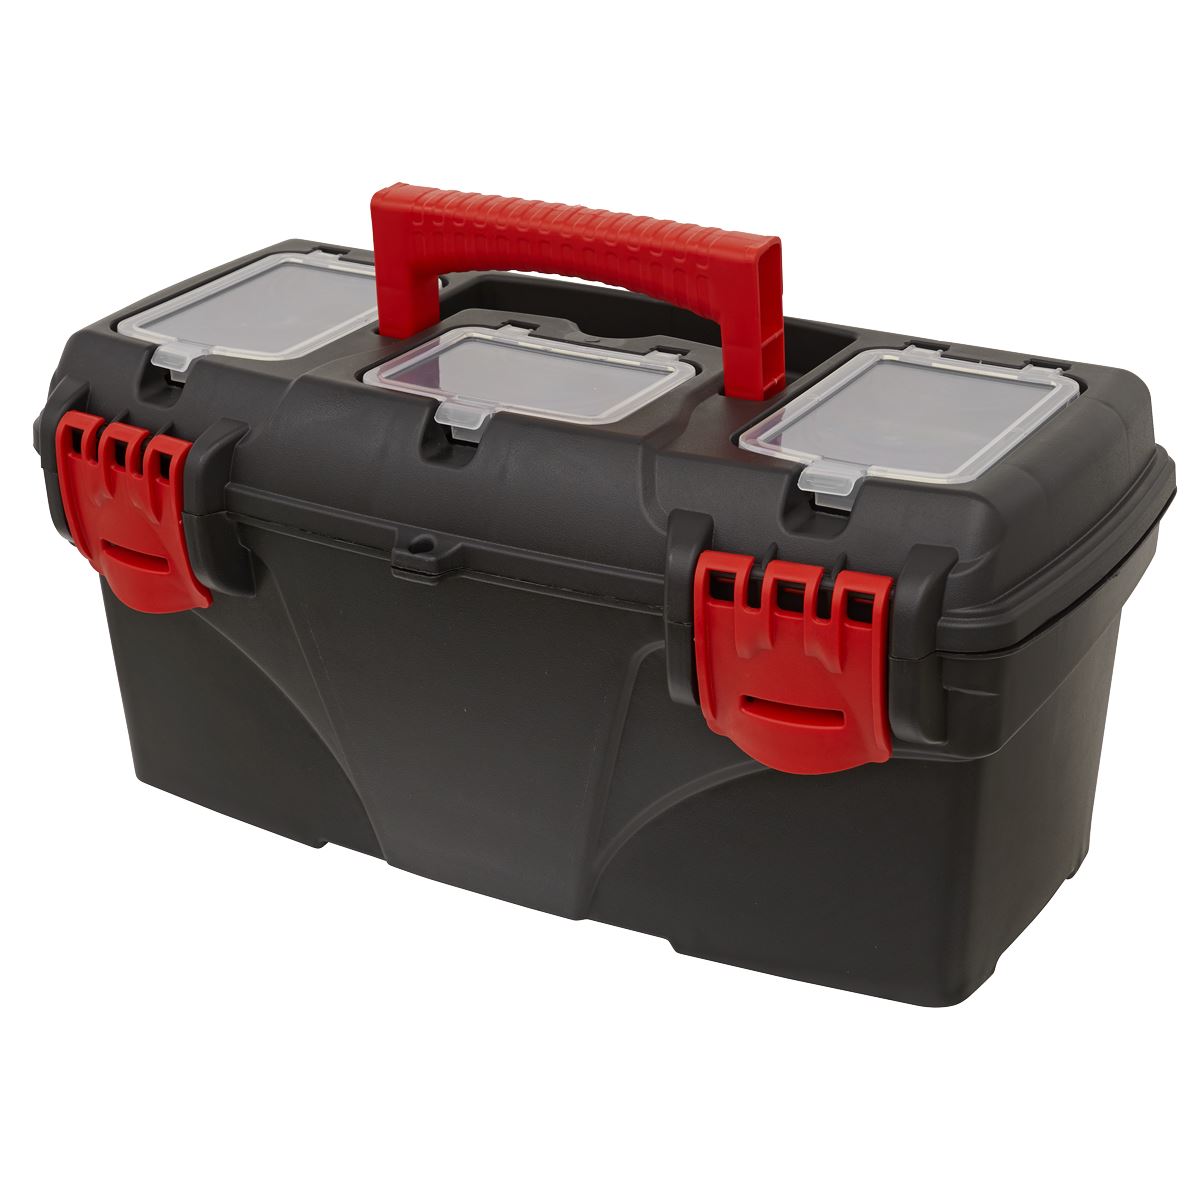 Sealey Toolbox with Tote Tray 410mm